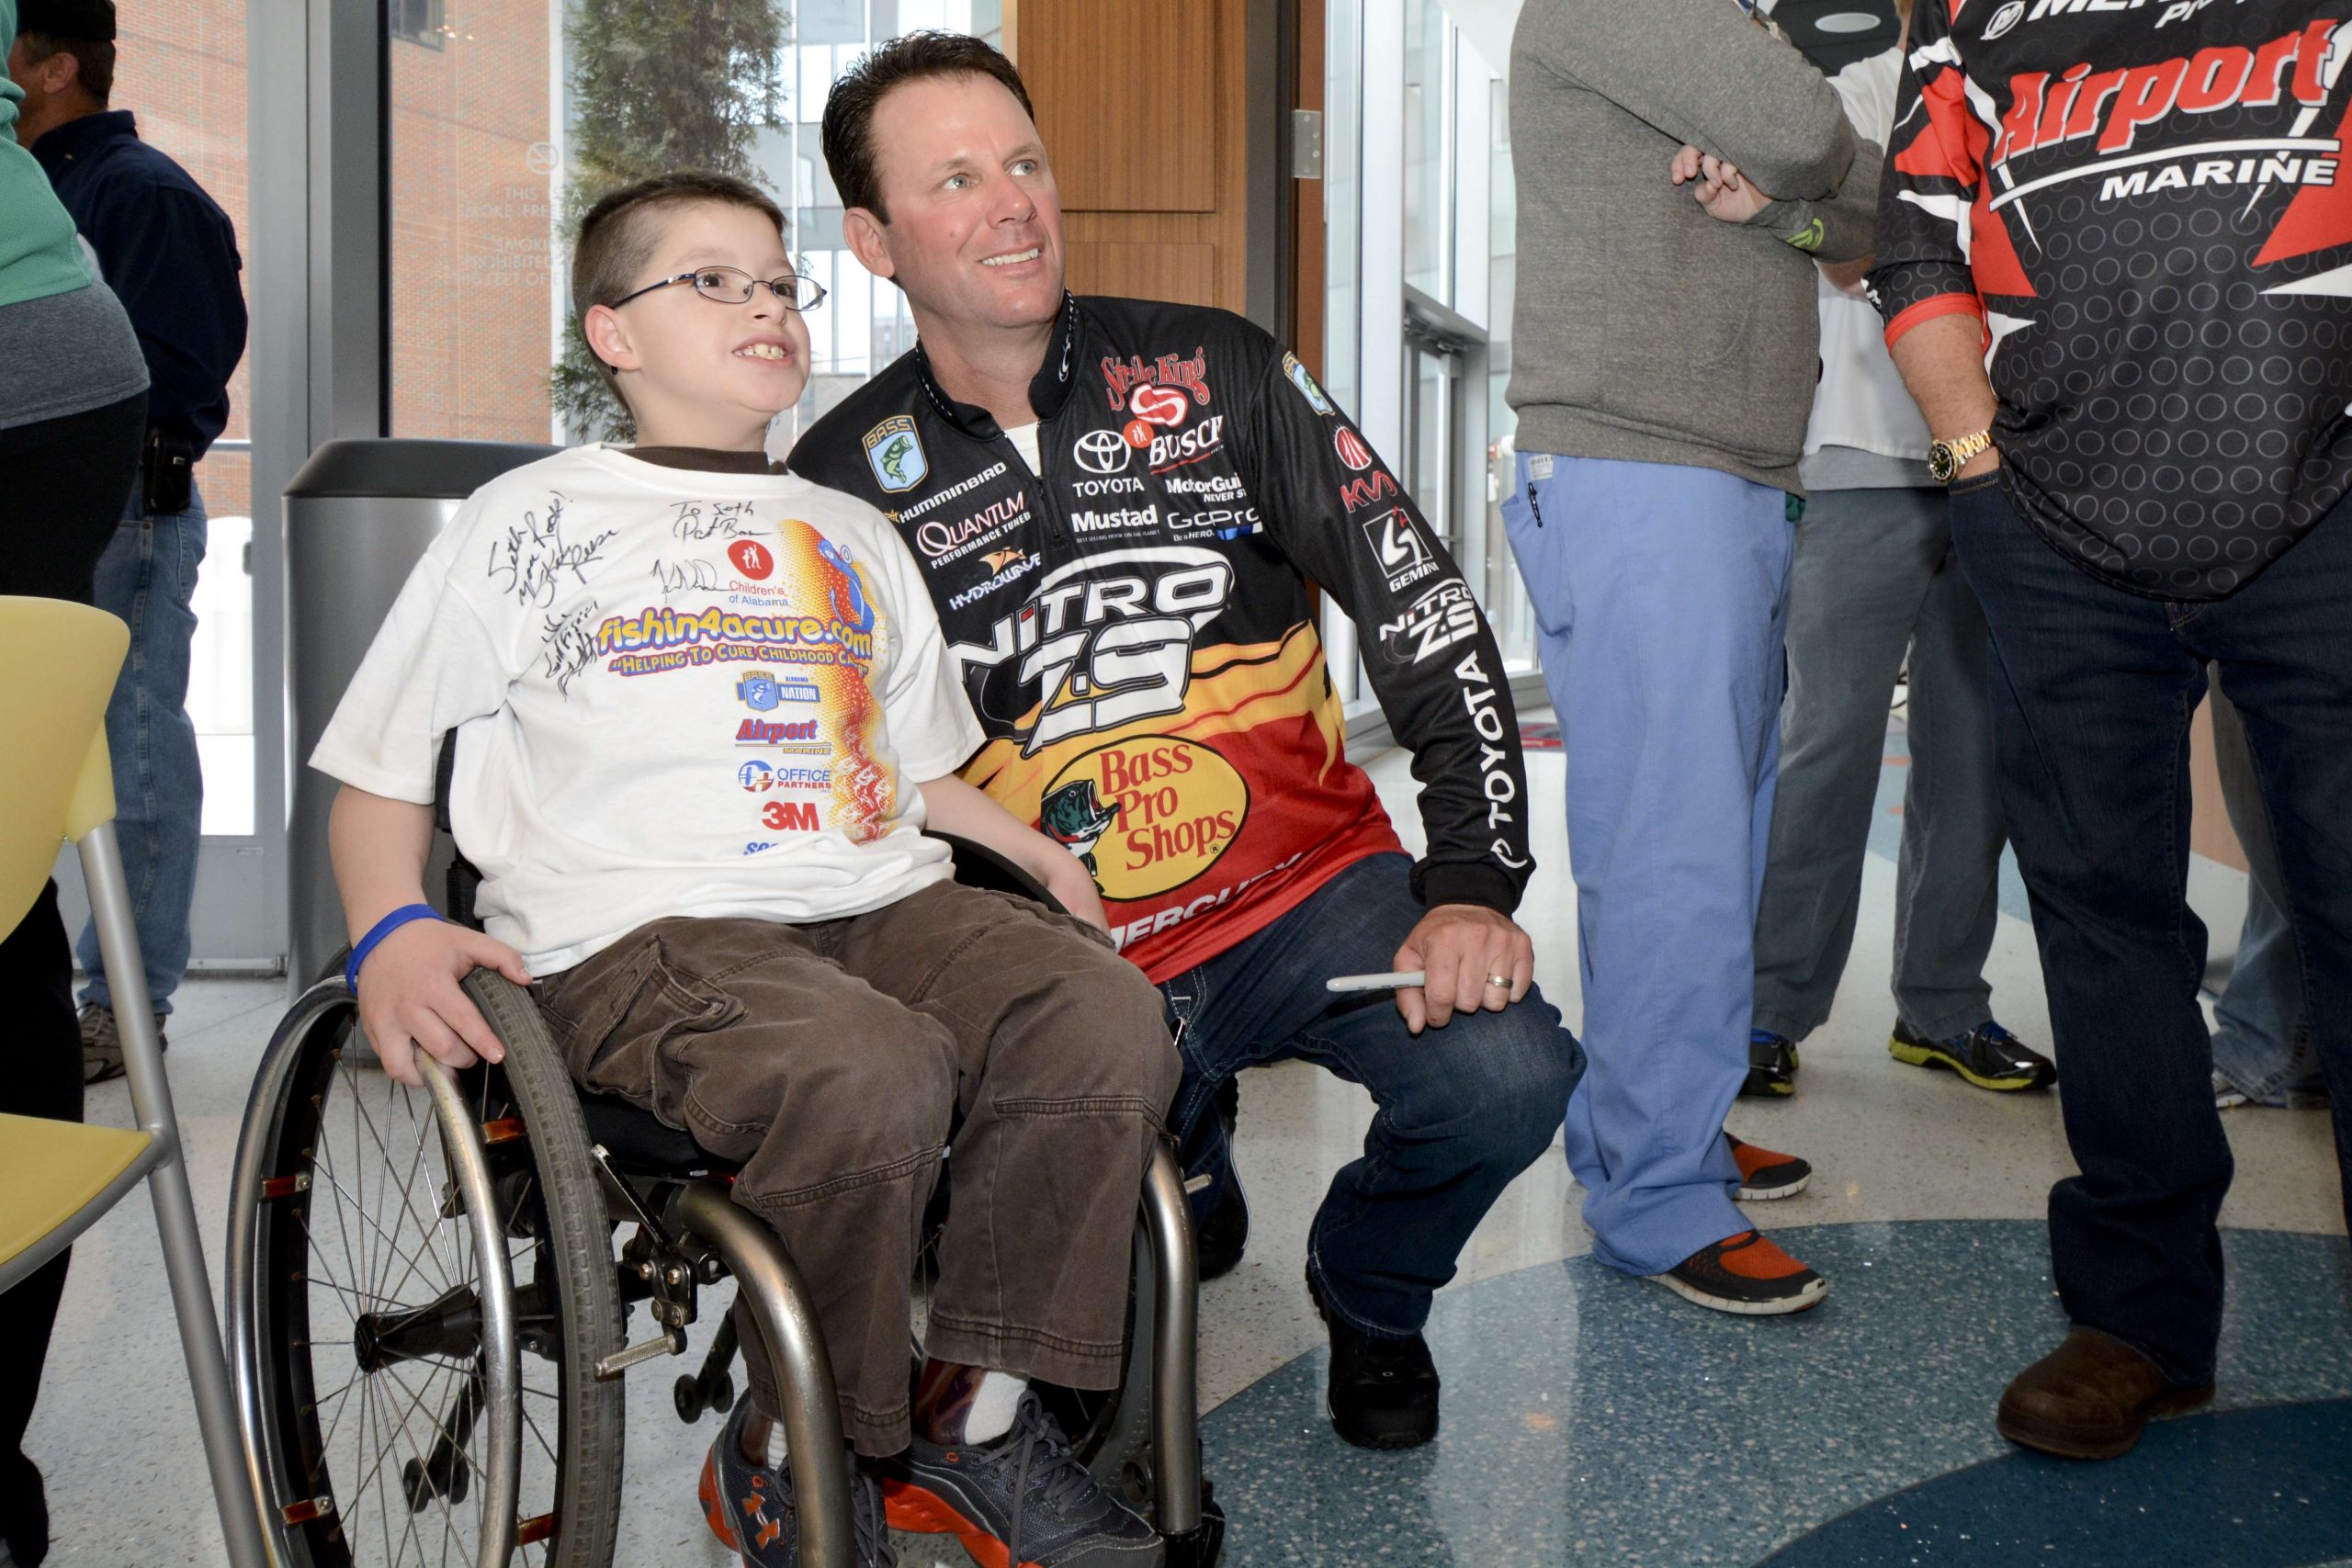 Kevin VanDam takes a photo with a fan in his autographed-filled T-shirt.